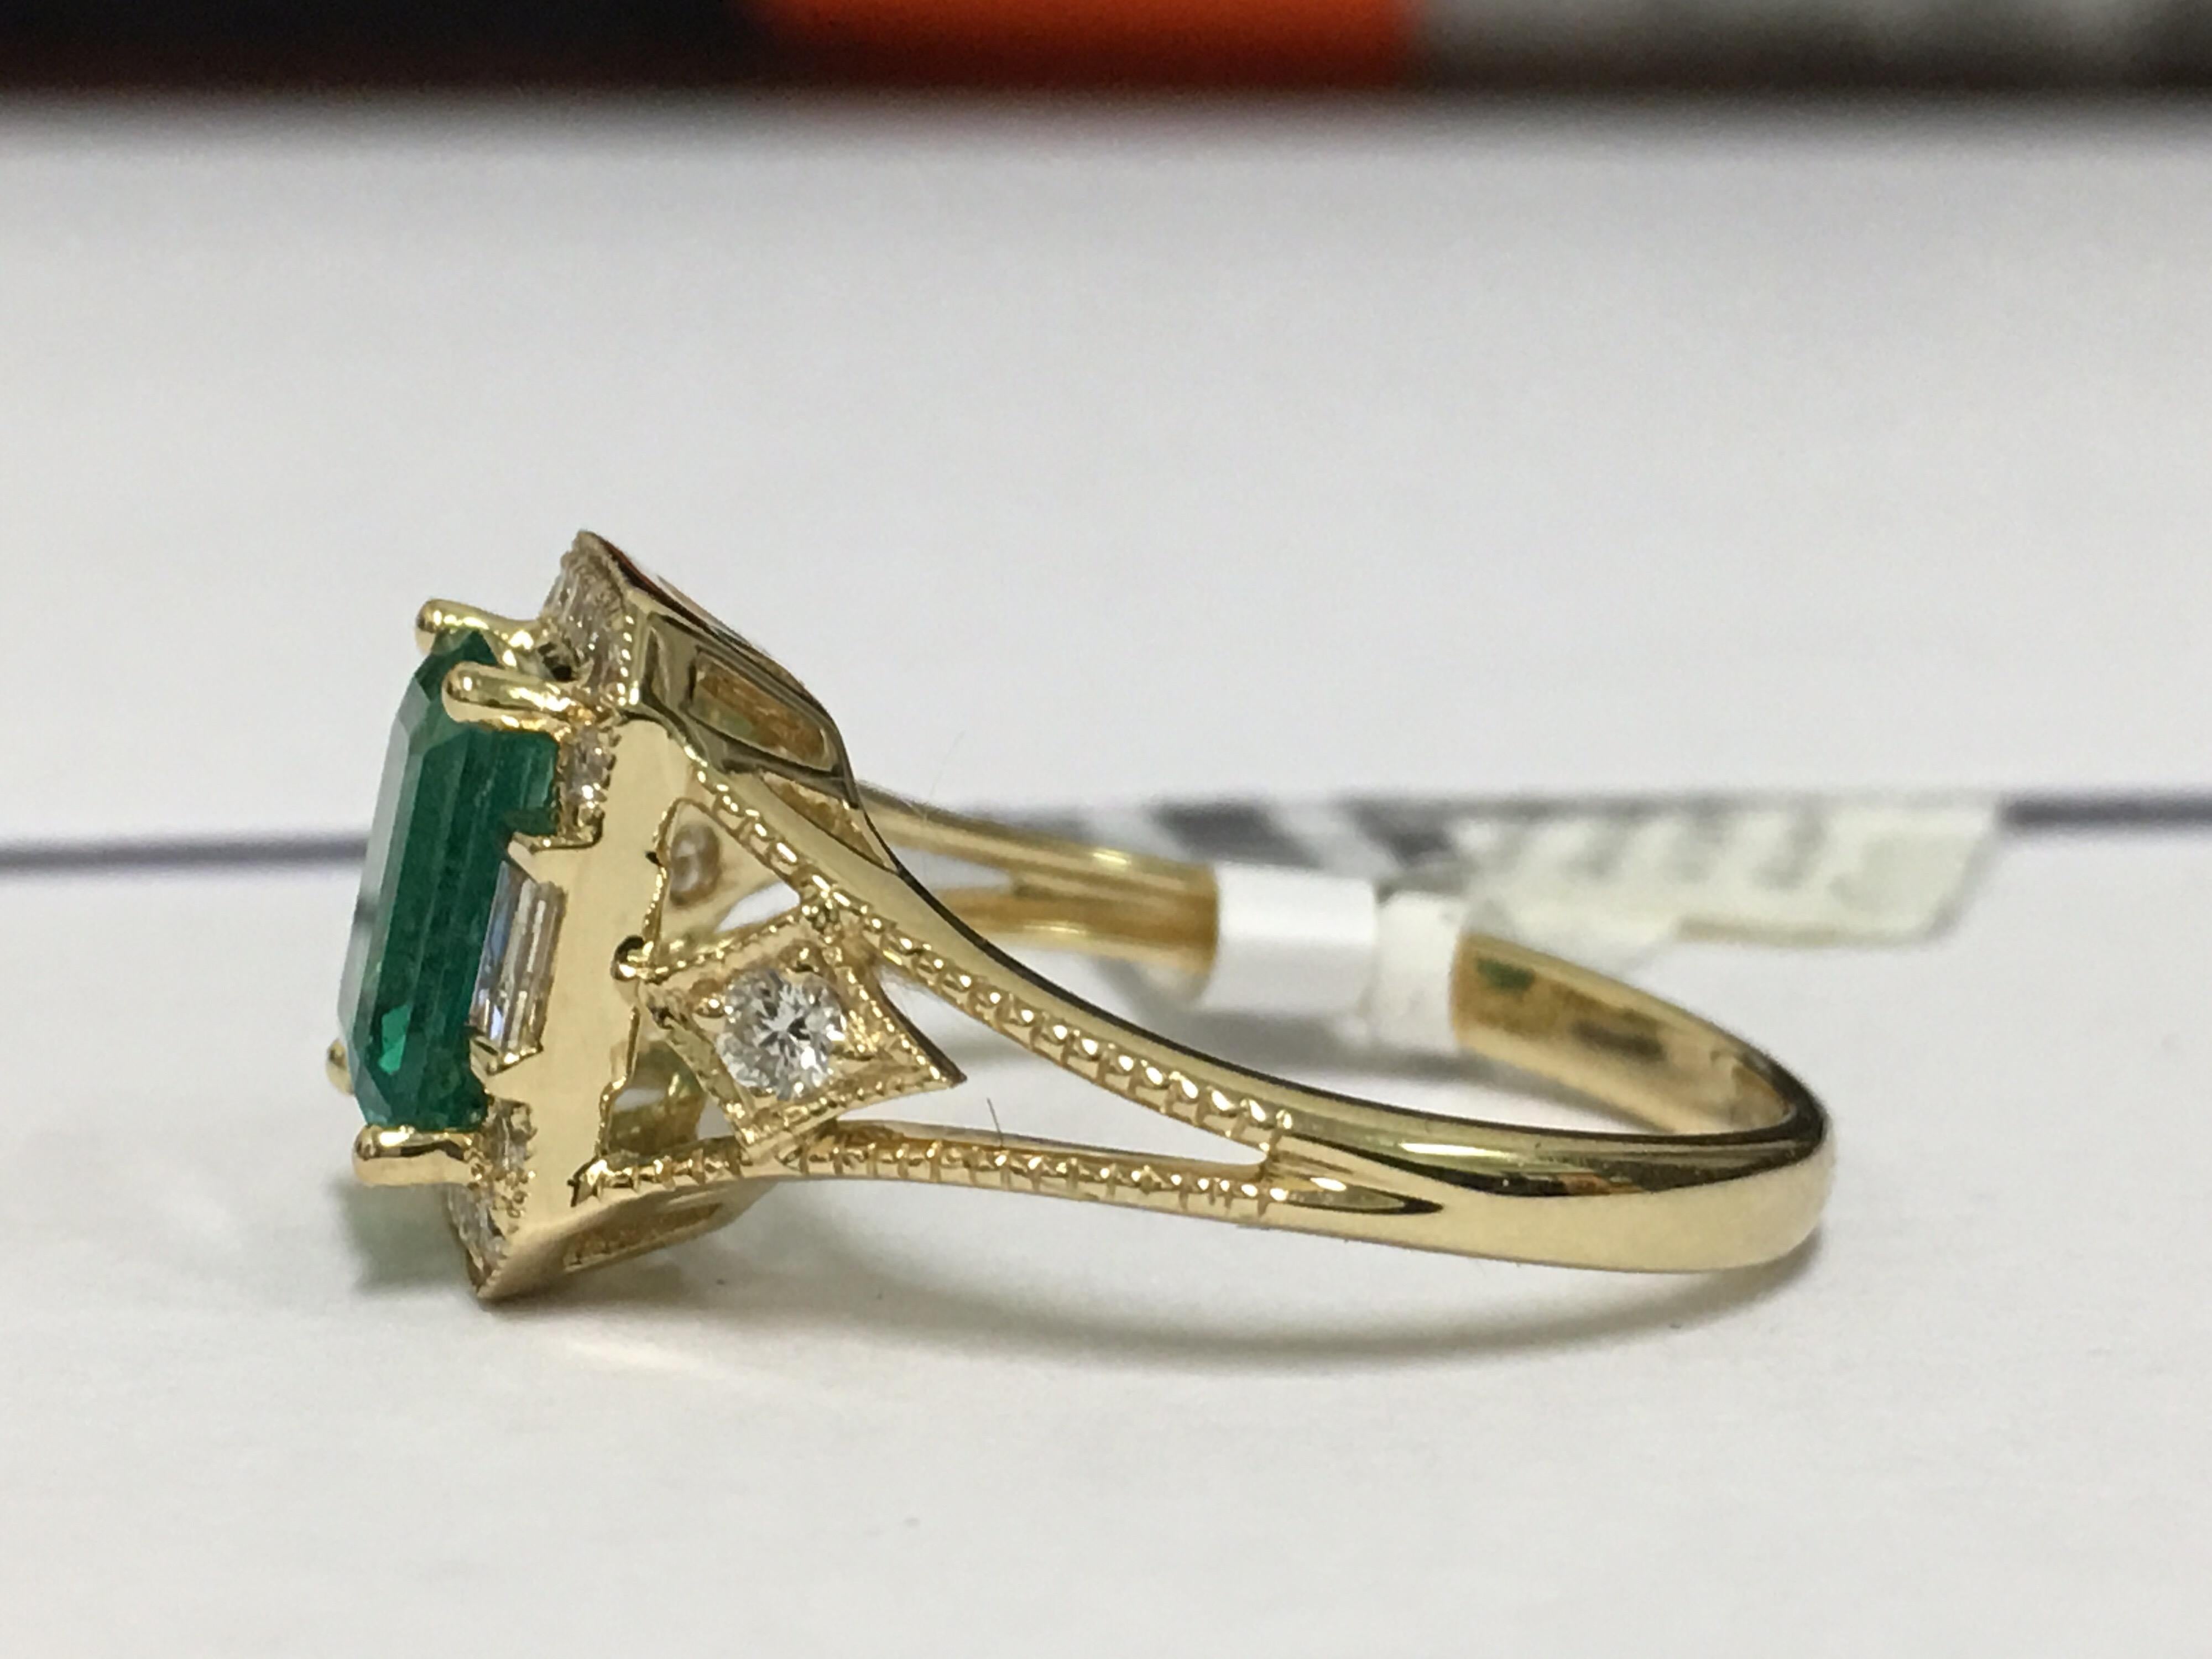 Natural emerald and Diamond Ring is one of a kind handcrafted ring set in 18 Karat Yellow Gold.
The emerald cut Emerald is 1.38 Carat. Two Baguette diamonds are 0.13 Carat and other white round diamonds are 0.22 Carat total of 0.35 Carat.Total Gold